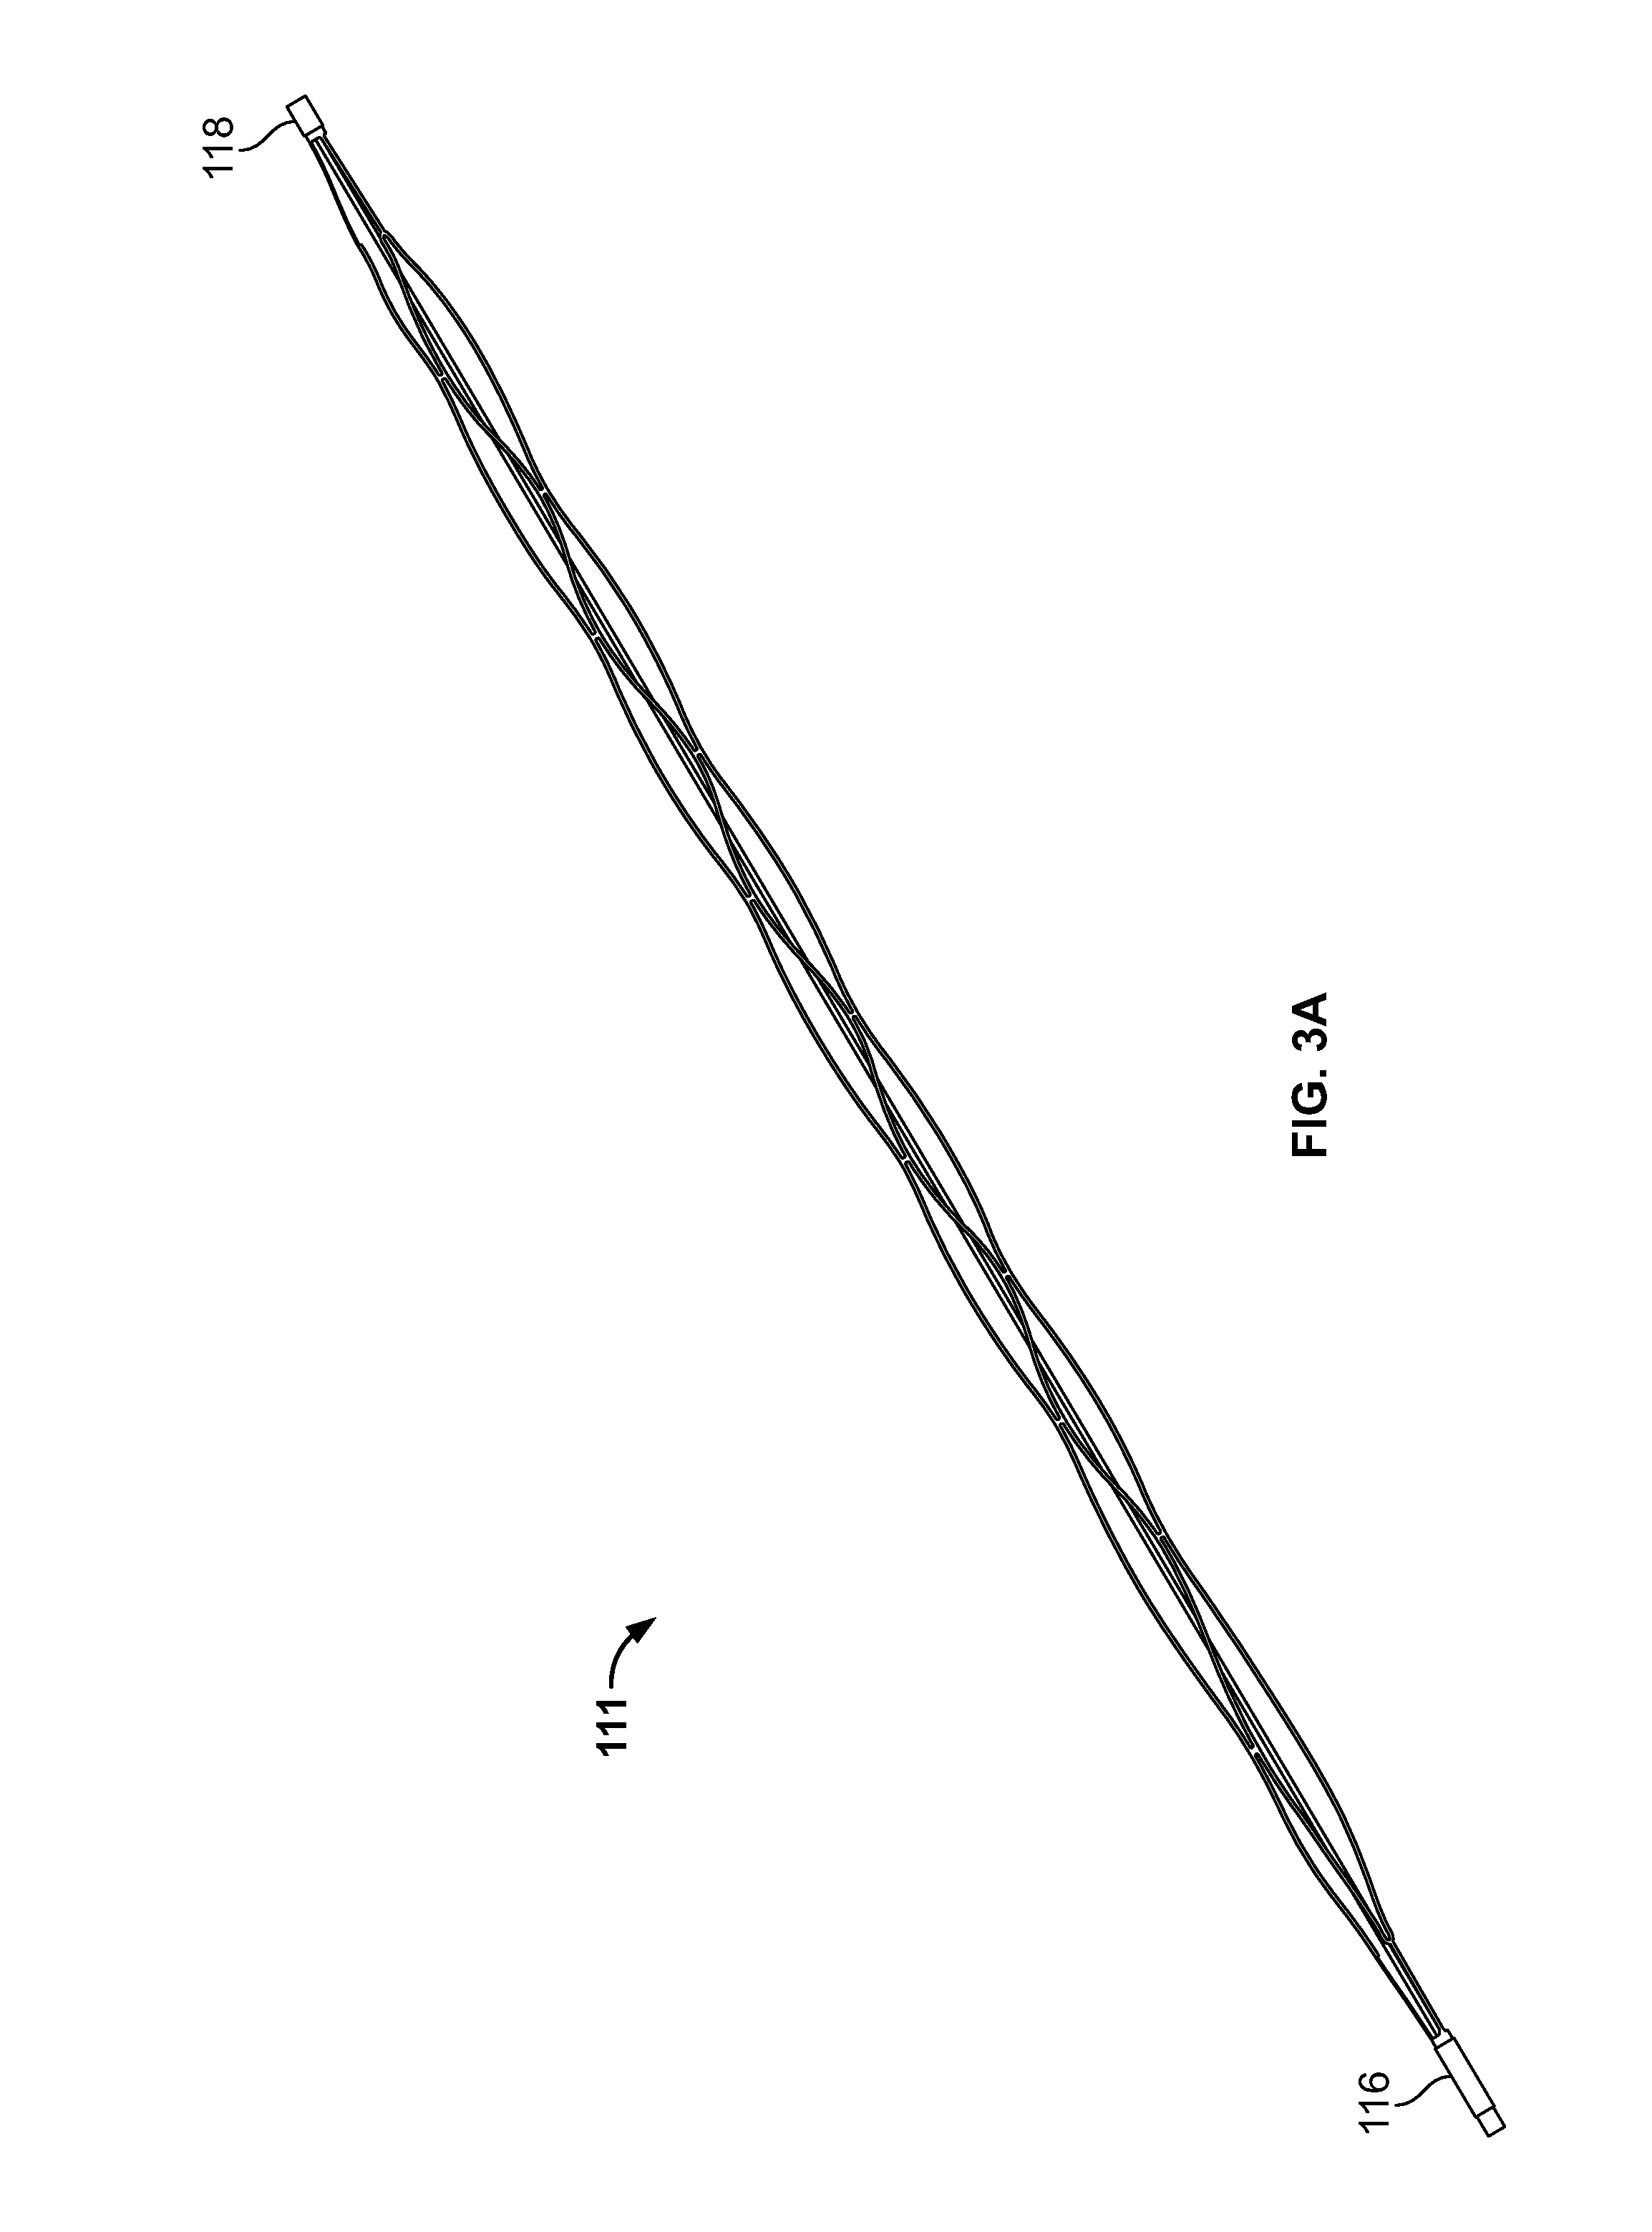 Design and methods for a device with blood flow restriction feature for embolus removal in human vasculature